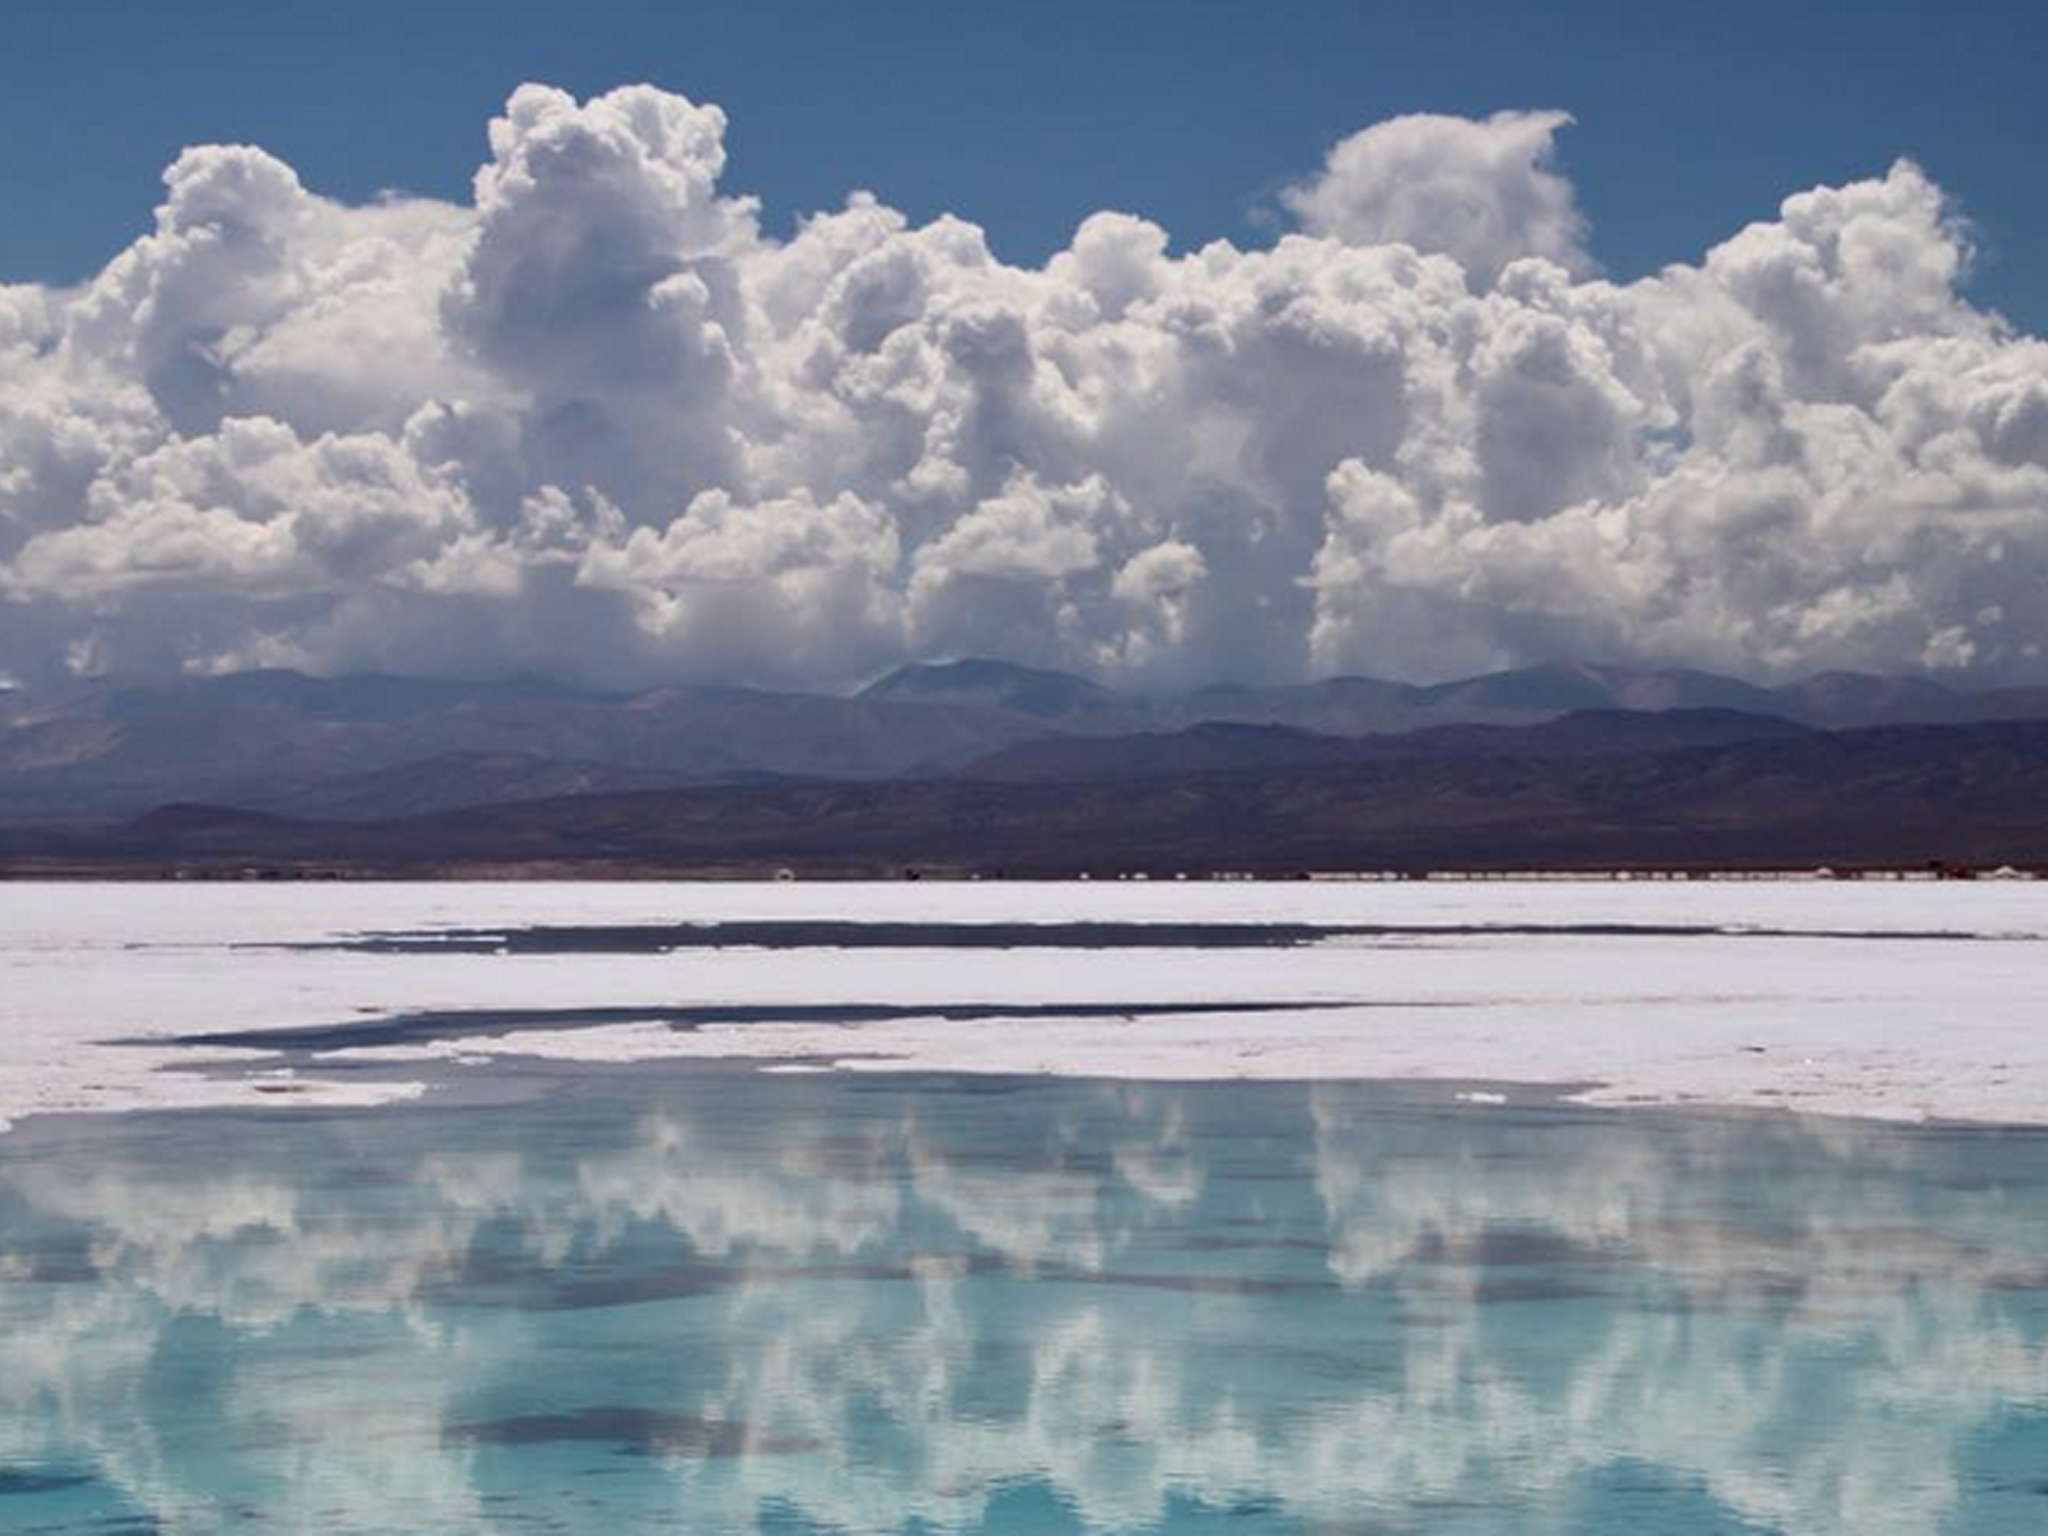 Turn a day trip to the Salinas Grandes into an overnight experience